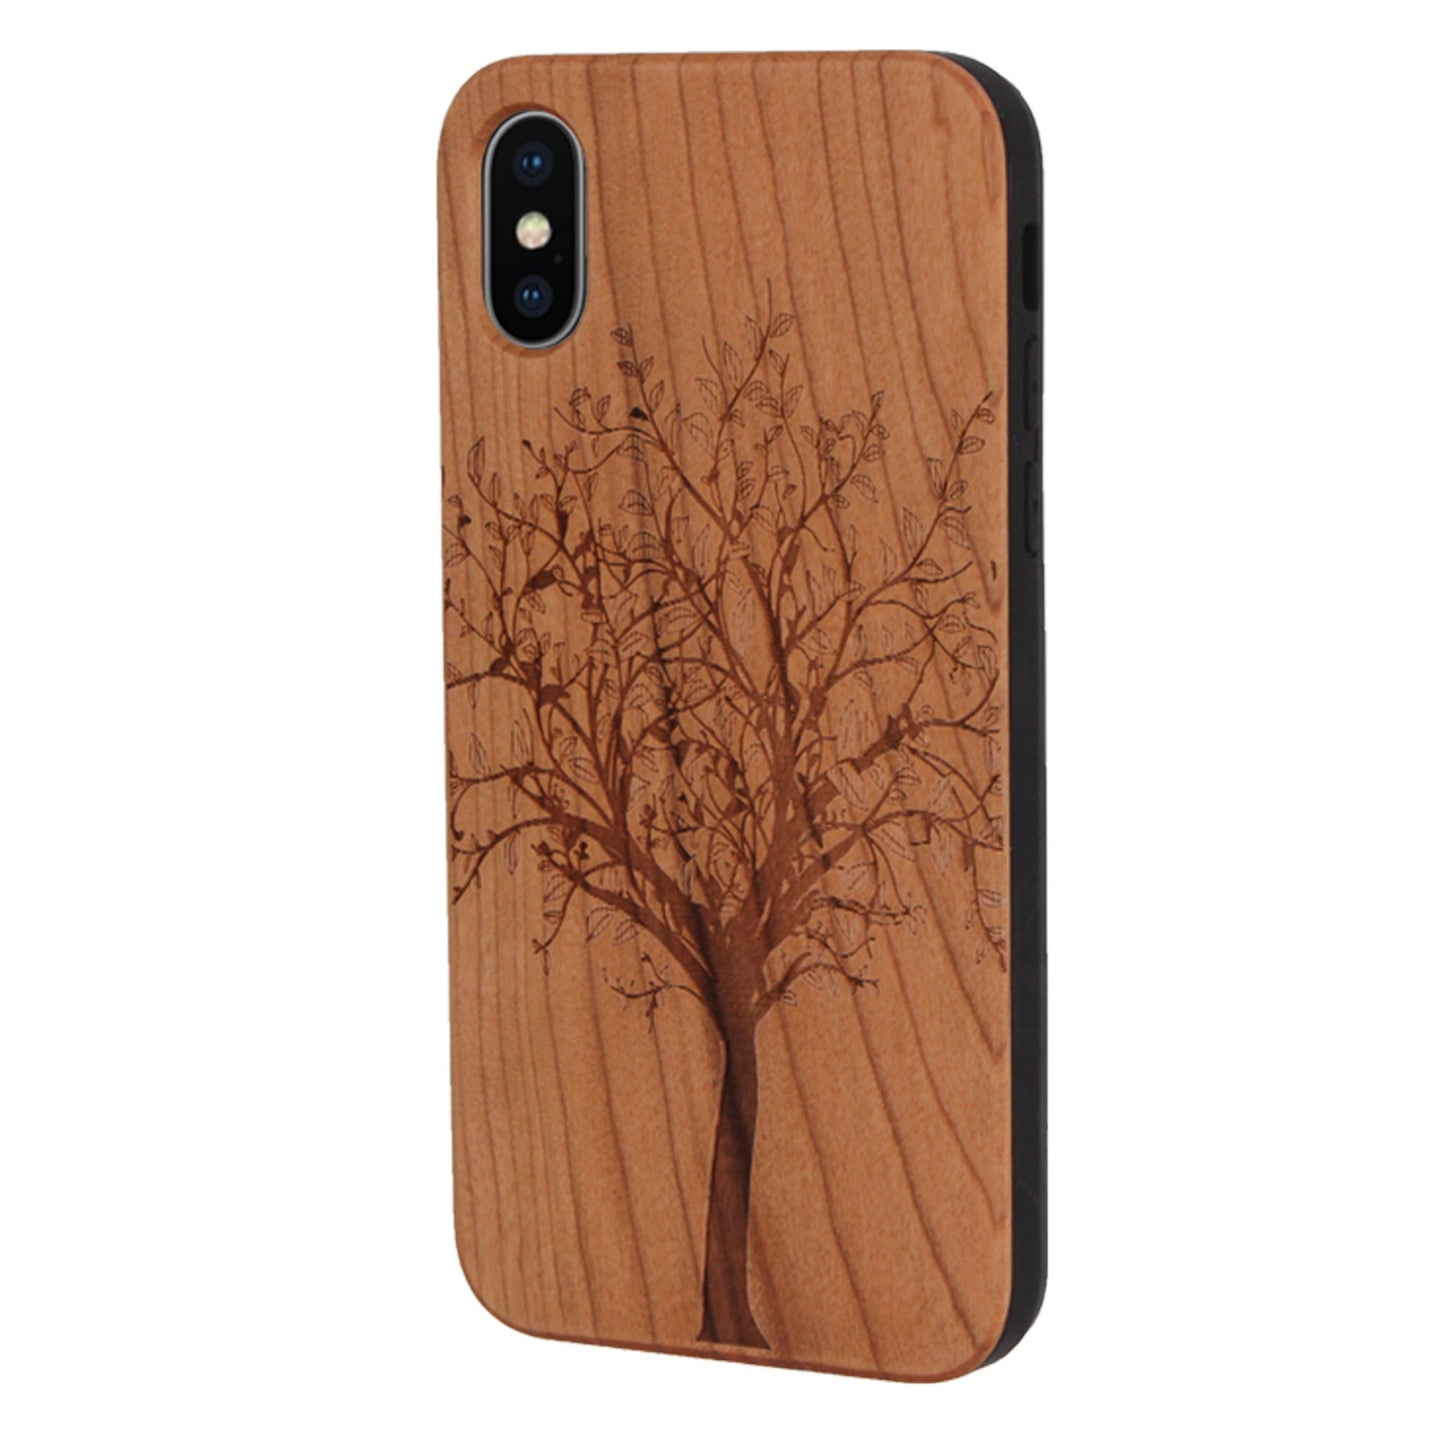 Tree of Life Eden case made of cherry wood for iPhone XS Max